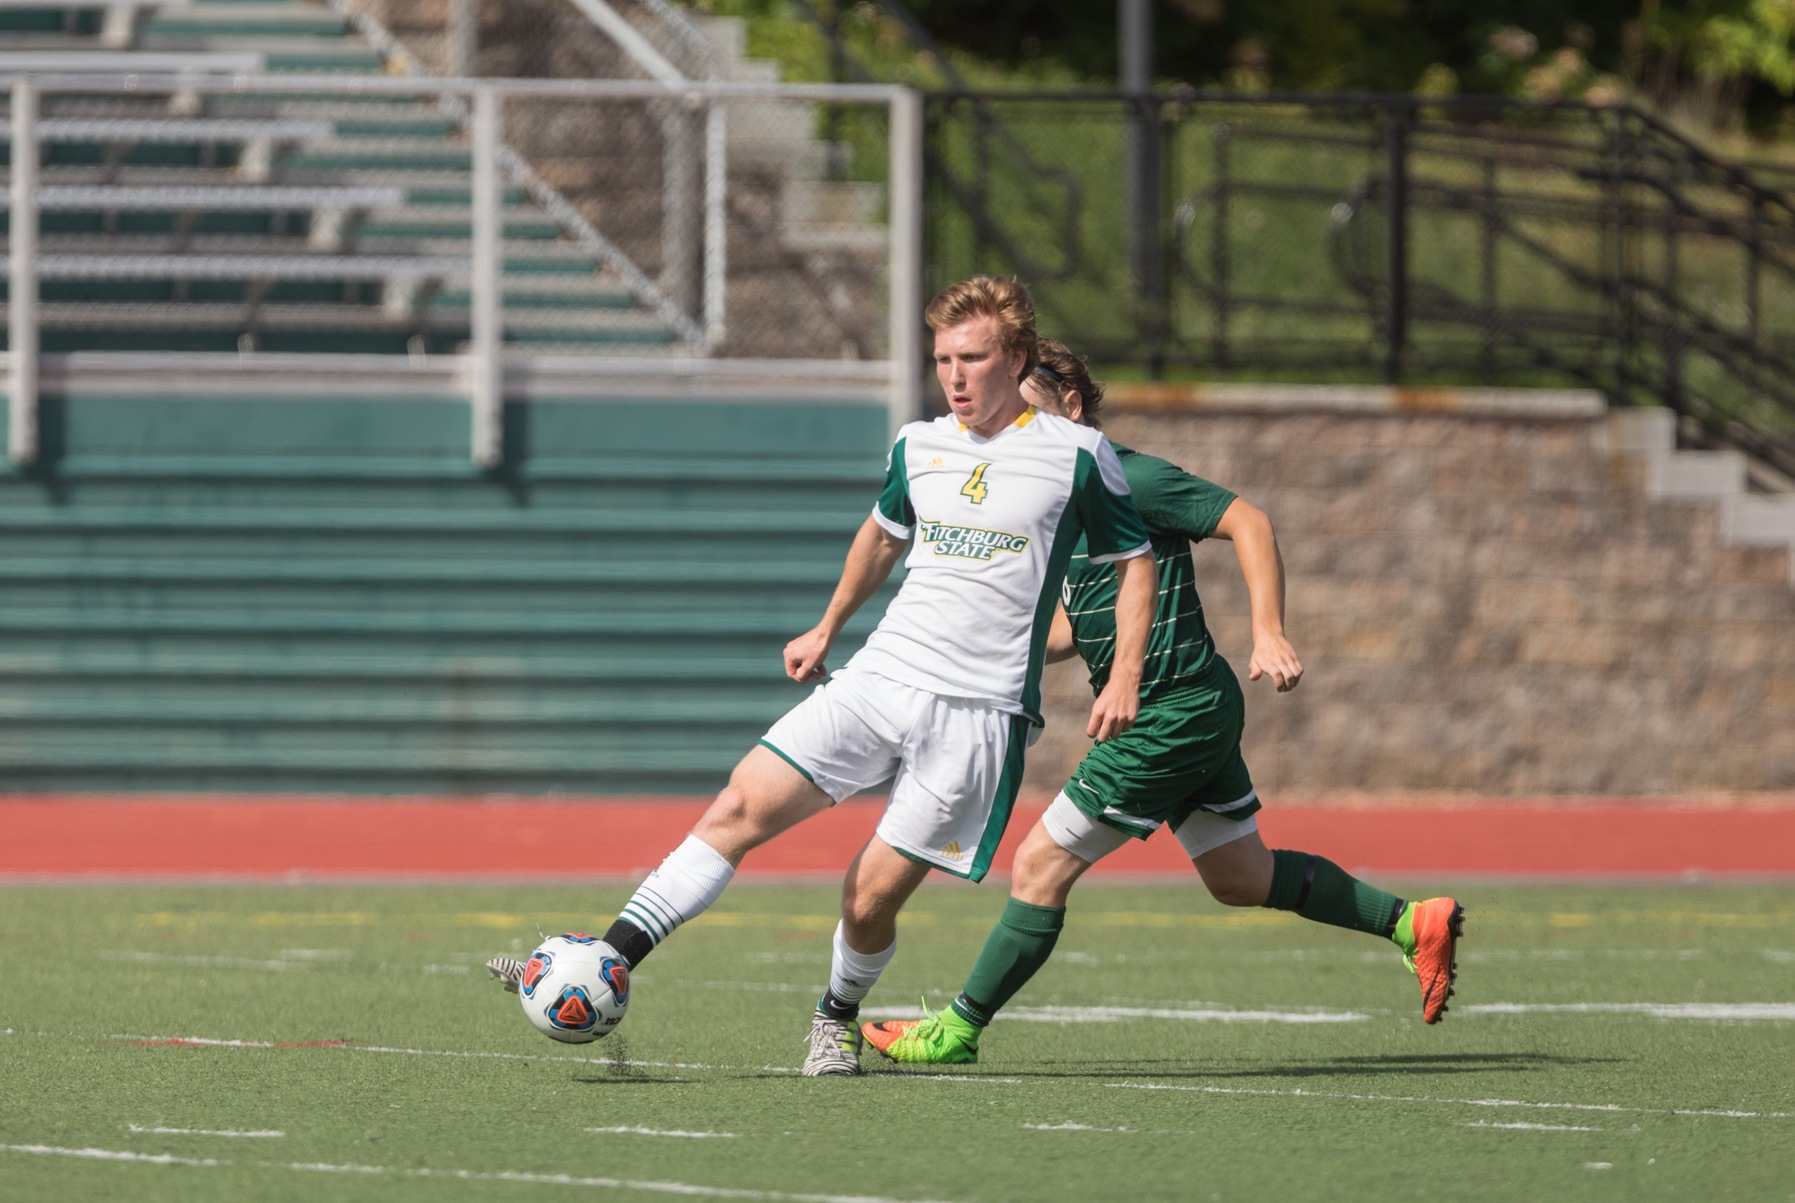 Falcons Blanked By Engineers, 2-0